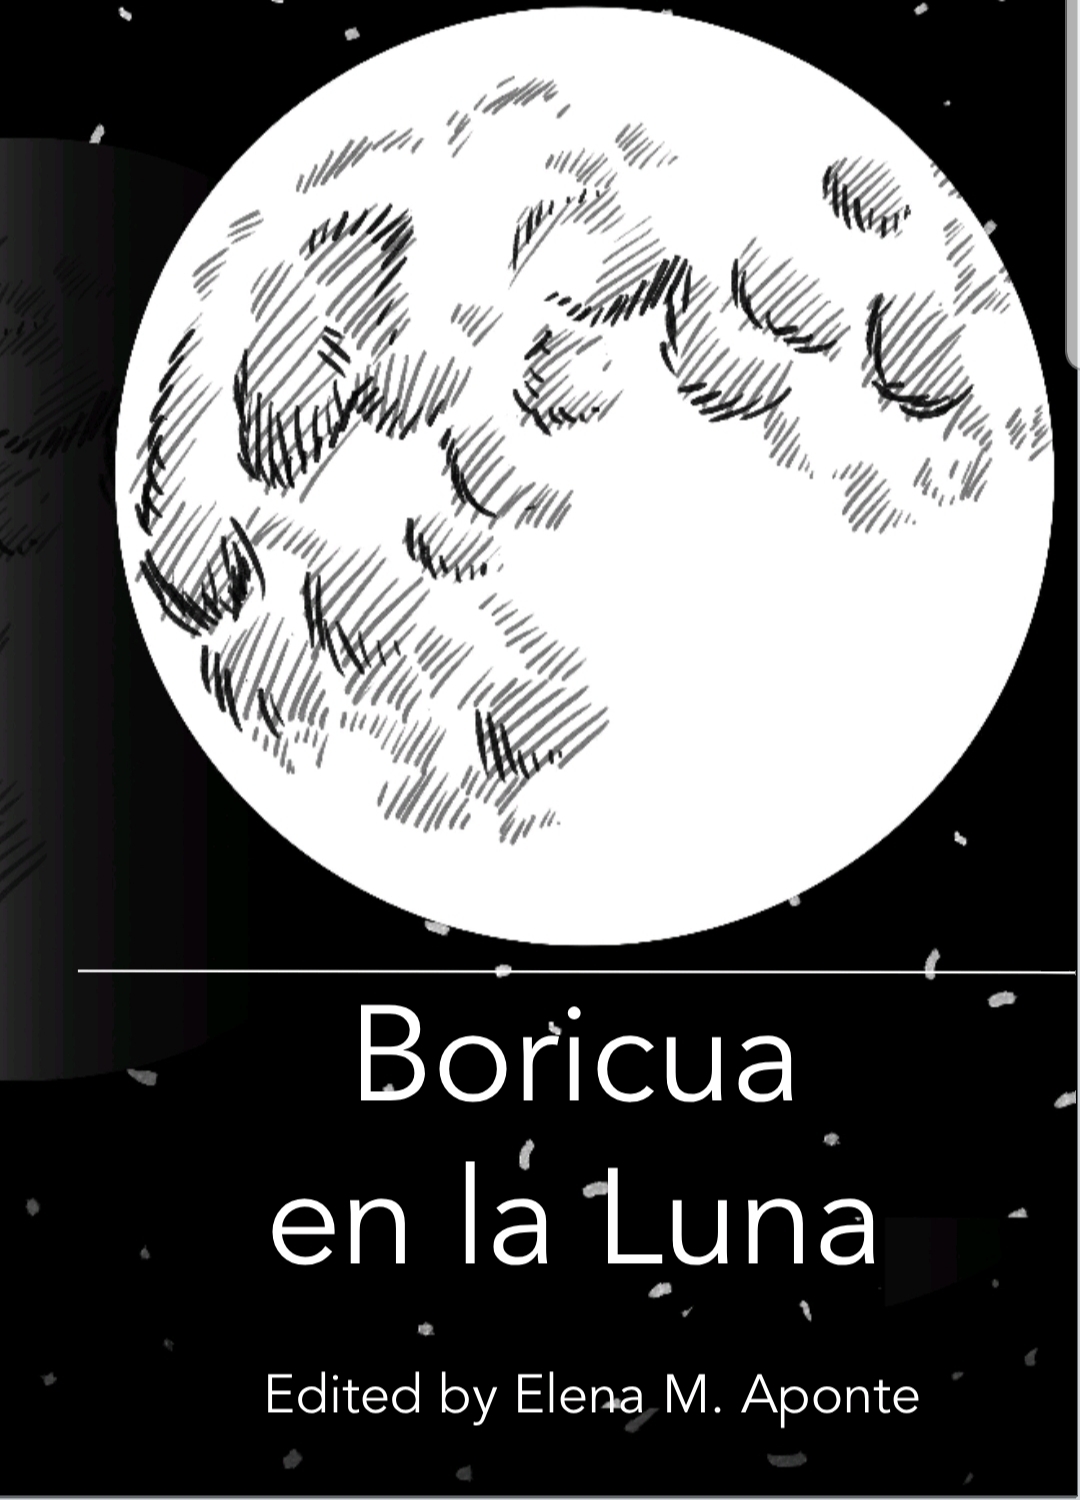 The front cover of Boricua en la Luna features an illustration of the moon